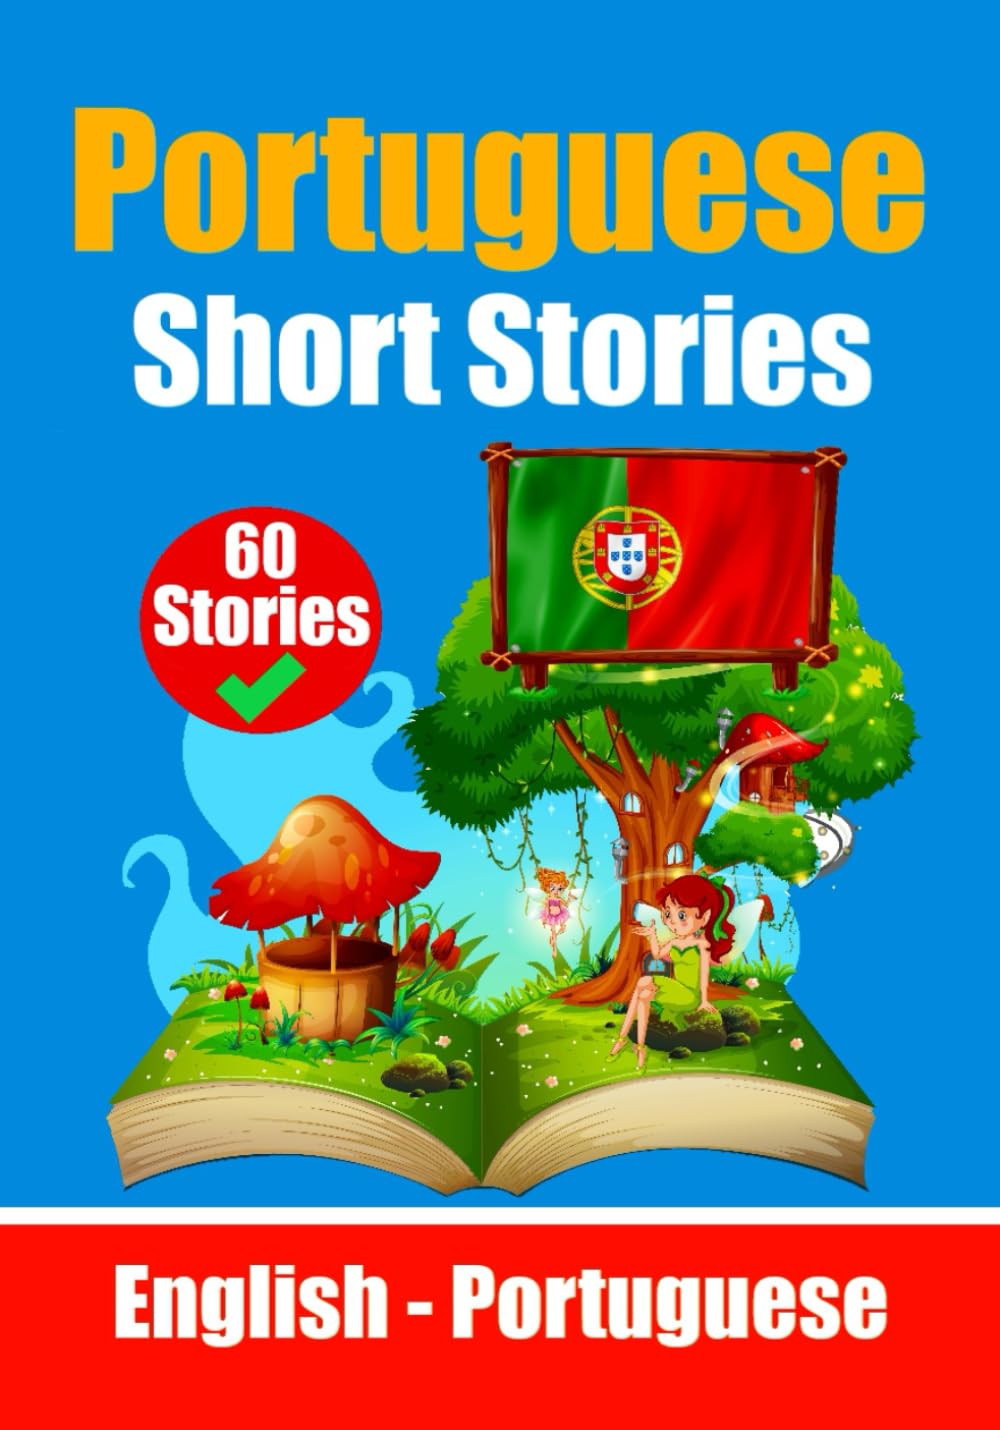 Short Stories in Portuguese